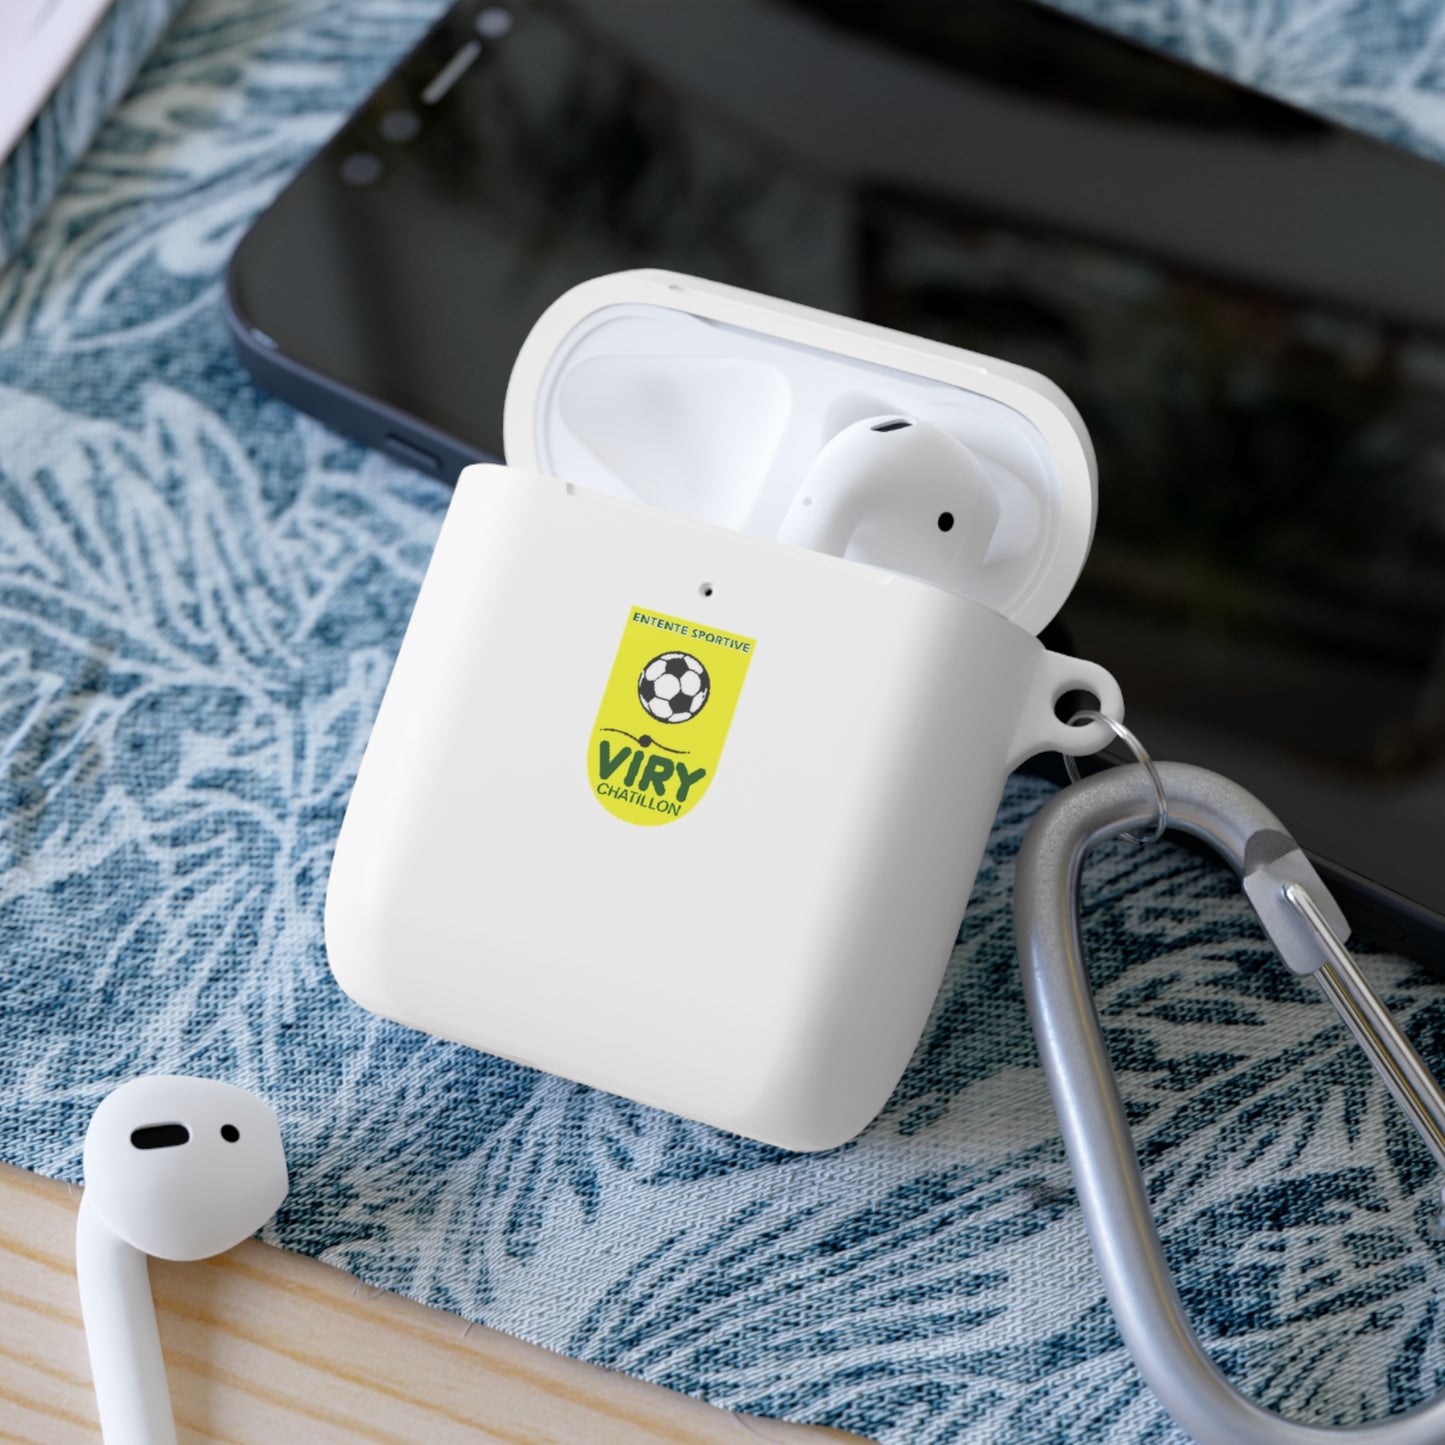 ES Viry Chatillon AirPods and AirPods Pro Case Cover